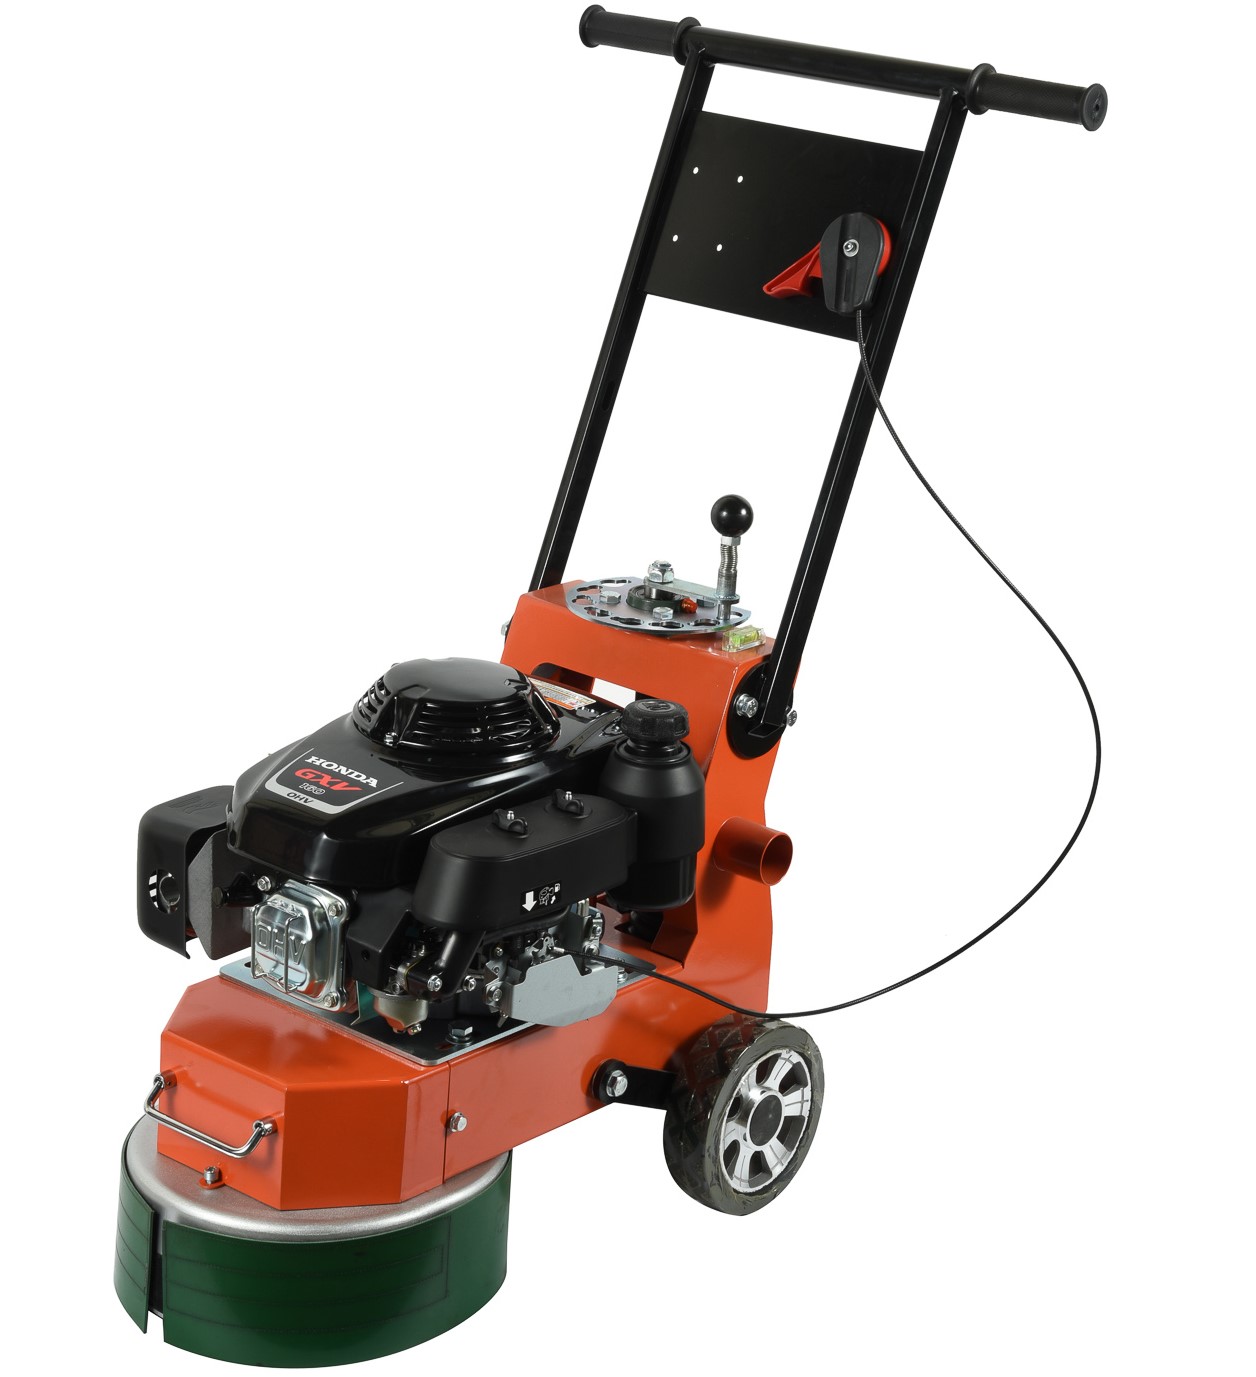 electric floor grinder suppliers, electric floor grinder company, electric floor grinder factory, electric floor grinder products, electric floor grinder promotions